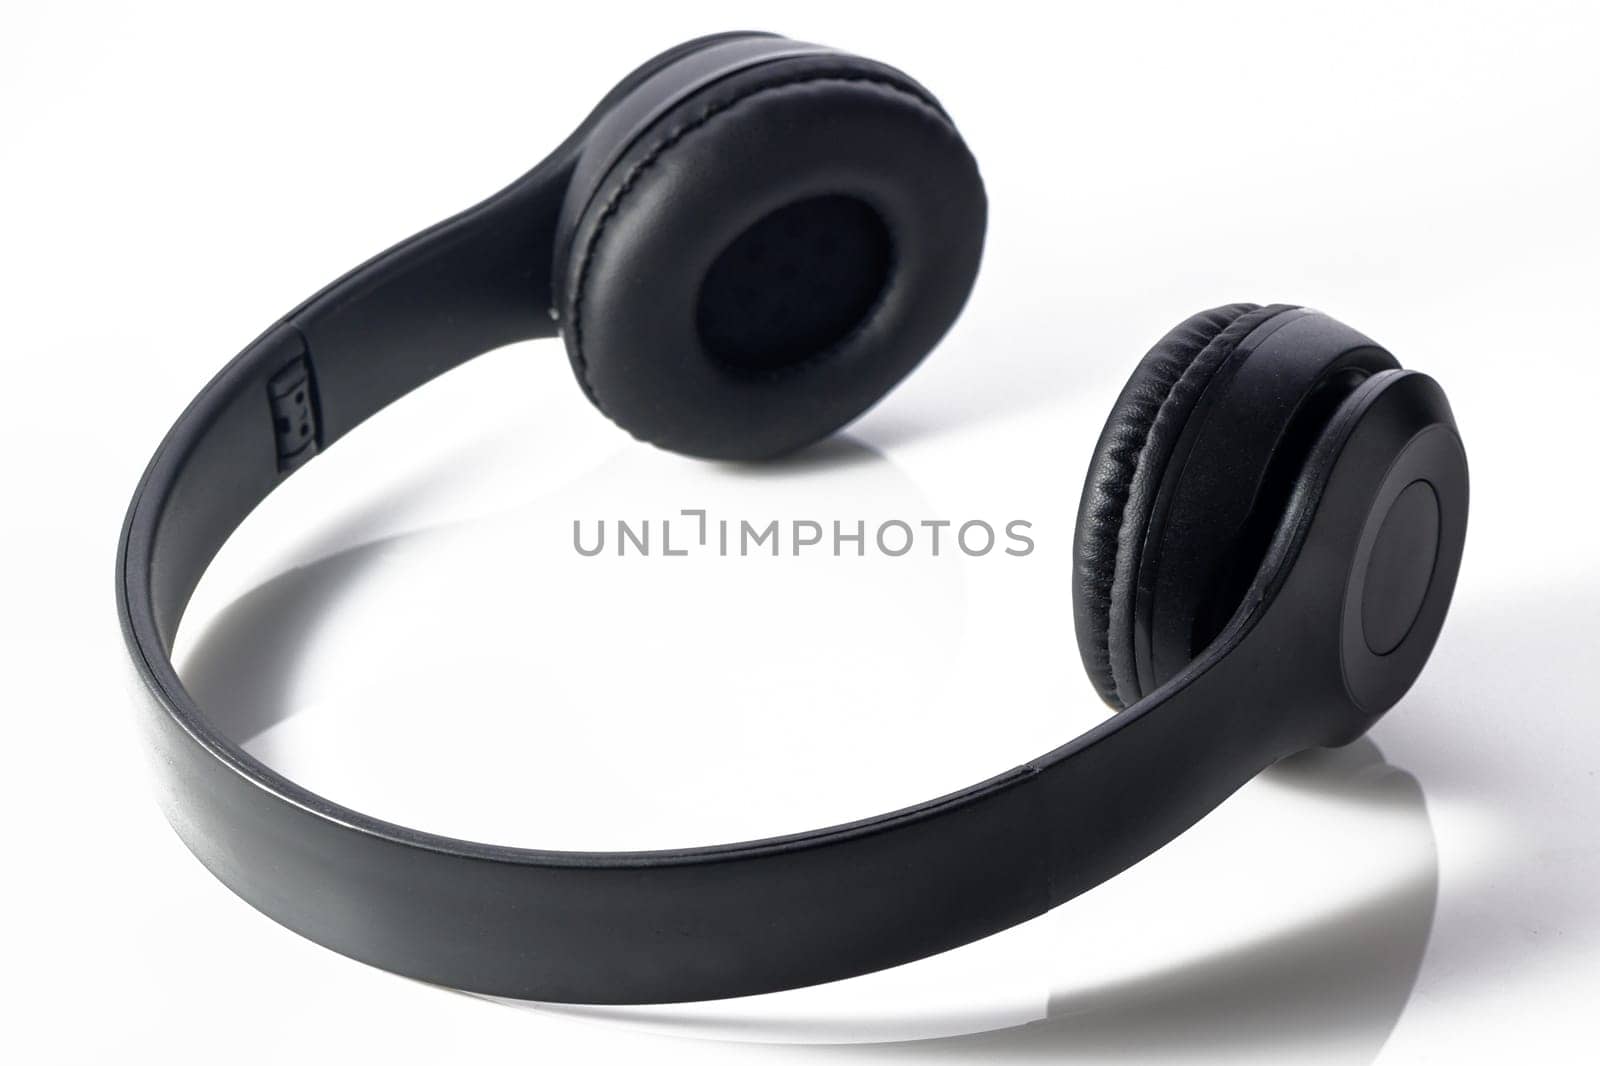 Full-size premium wireless headphones. Isolated on a white background